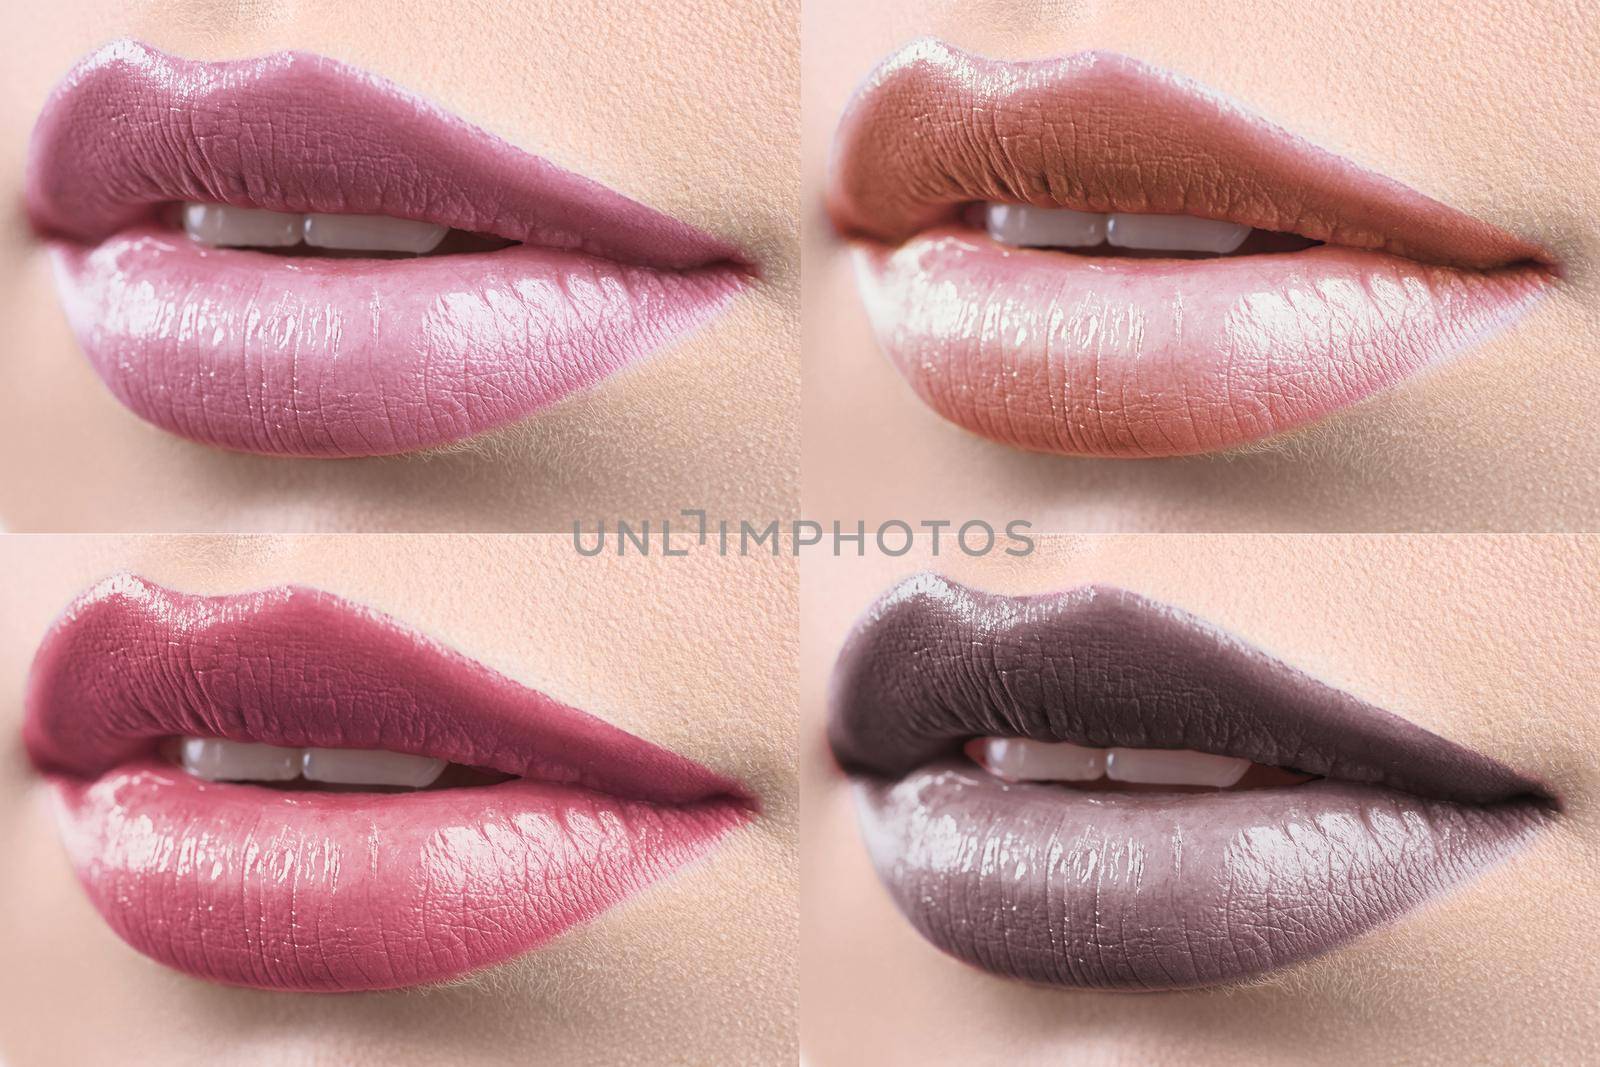 Collage of female lips covered in lipstick by SerhiiBobyk